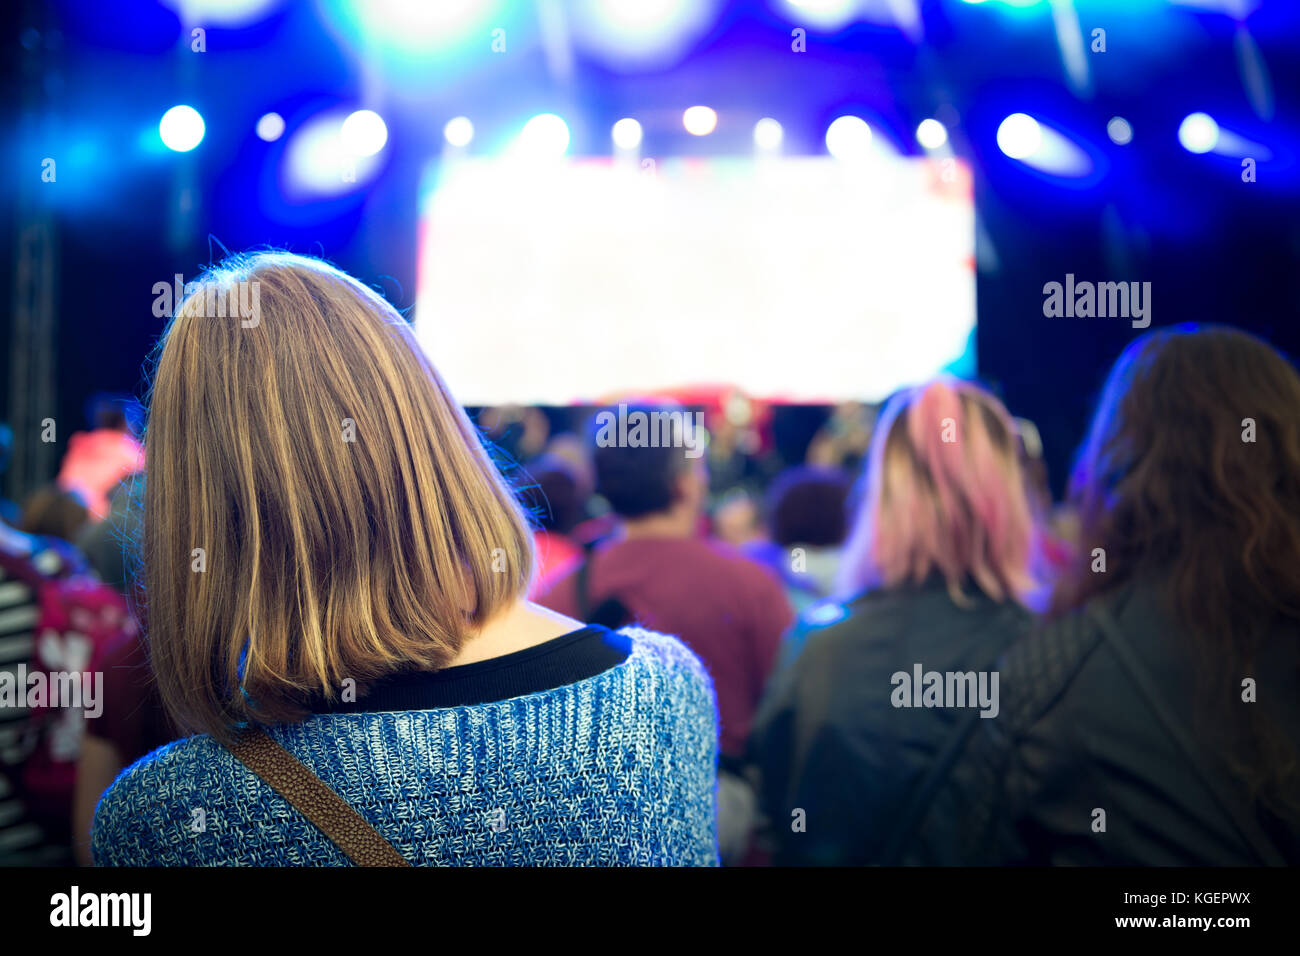 People enjoying an outdoors music, culture, community event, festival Stock Photo